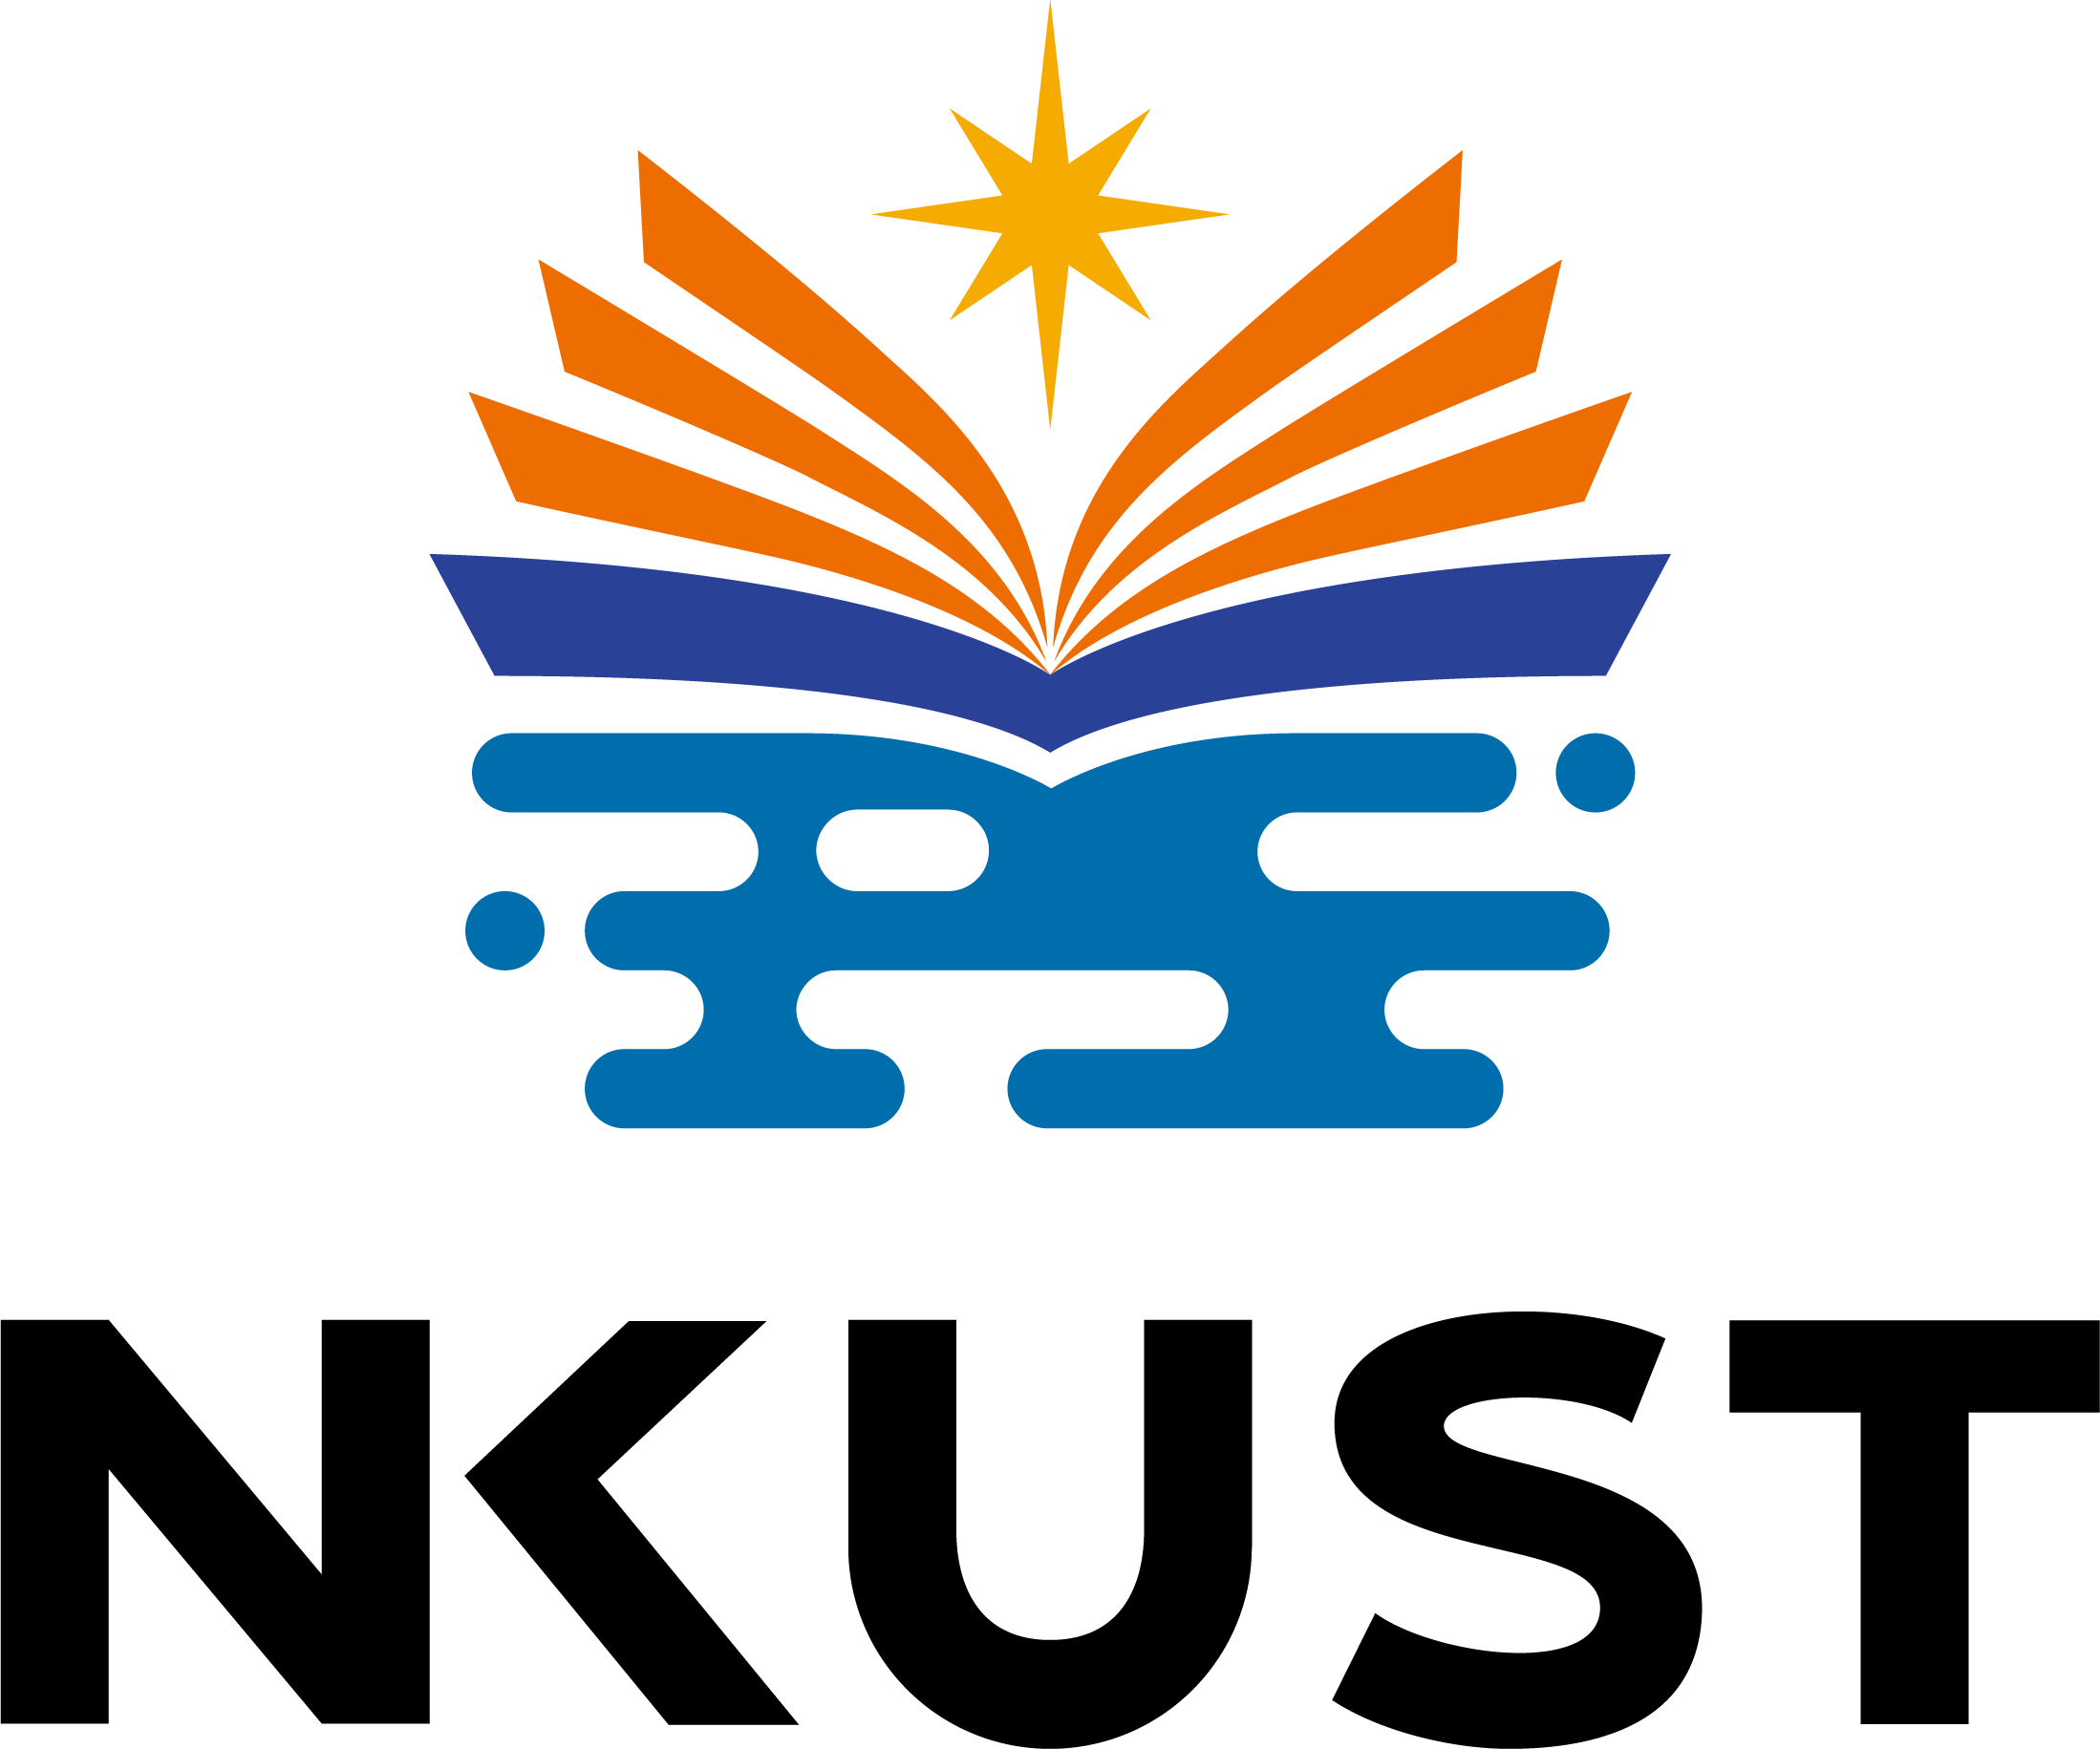 National Kaohsiung University of Science and Technology (國立高雄科技大學)